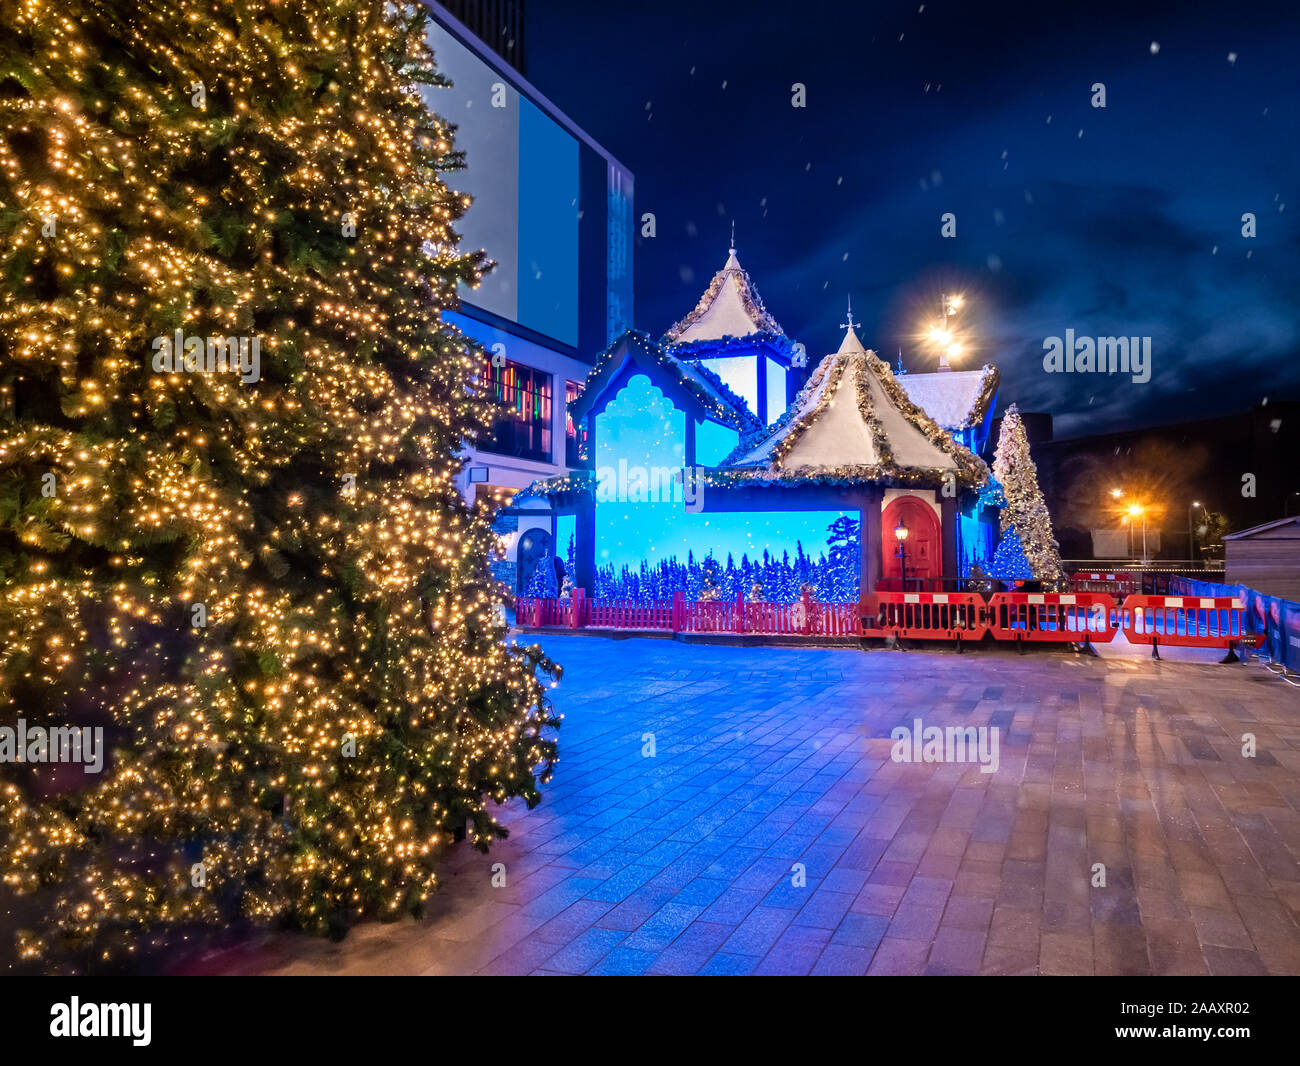 Christmas scene outdoor with decorated tree and ornamental lights in front on the main entrance of Westfield of London Stock Photo